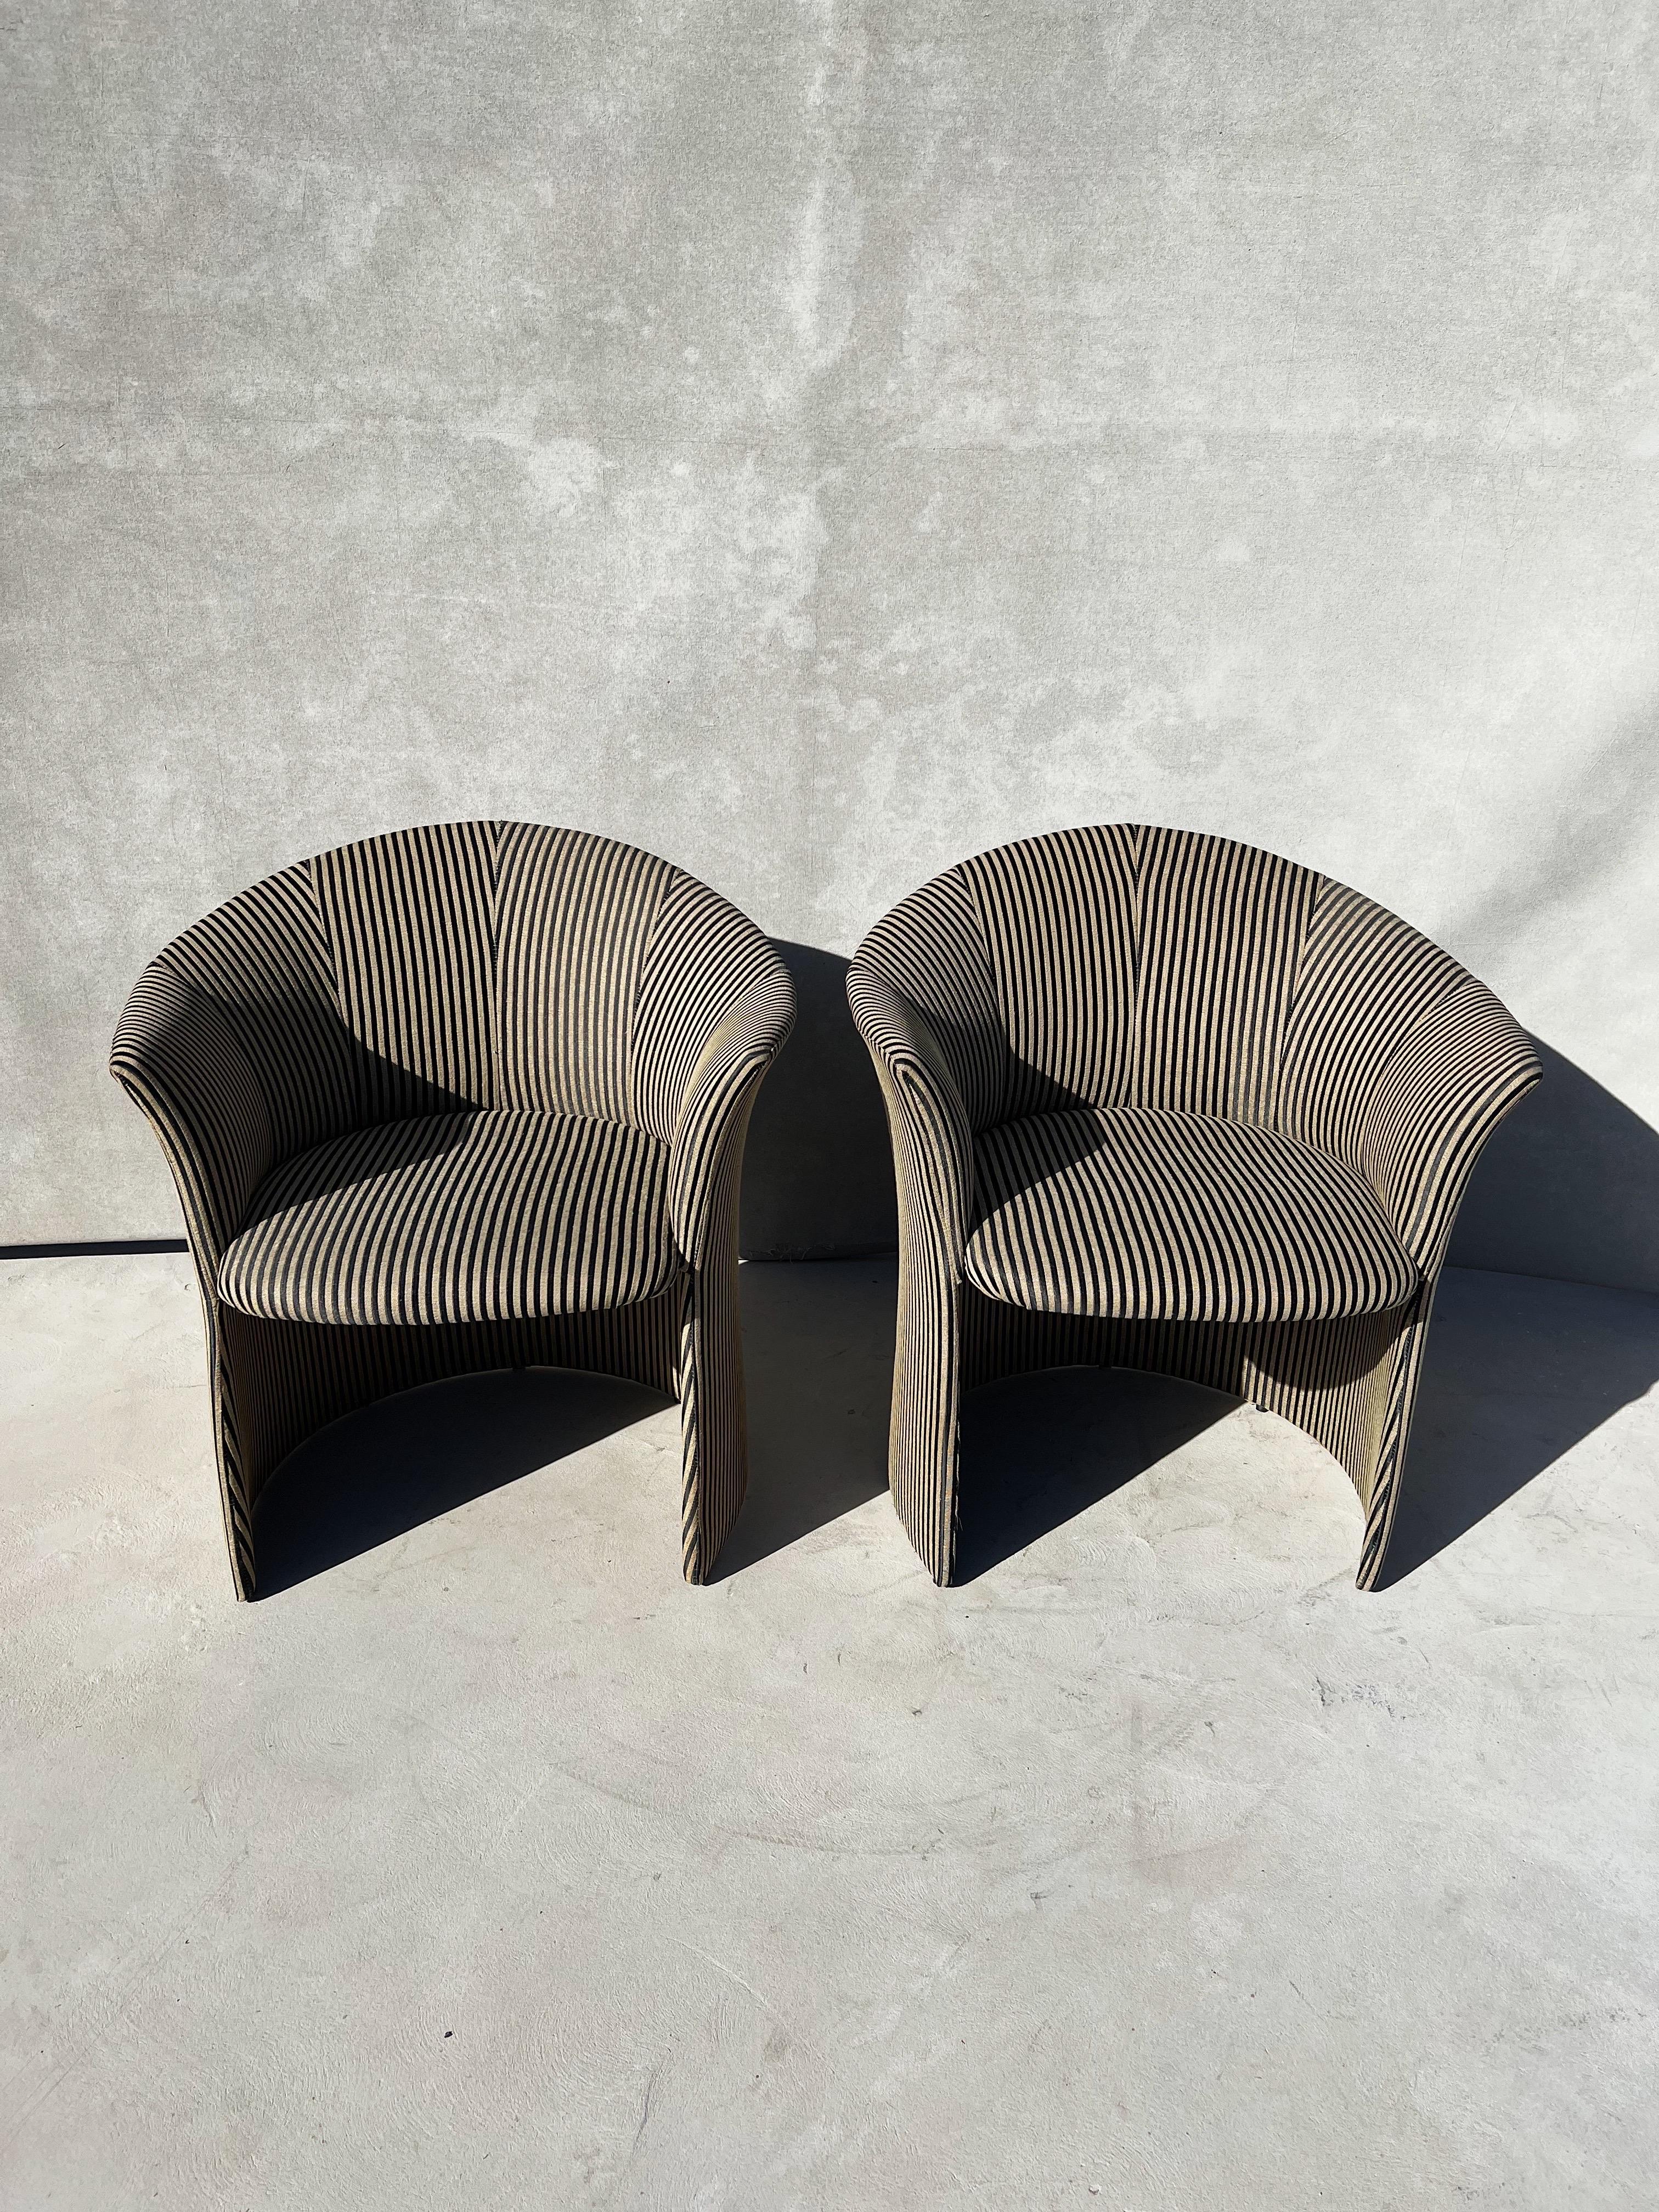 Vintage Pair of Striped Chairs, Attributed to Roche Bobois  5